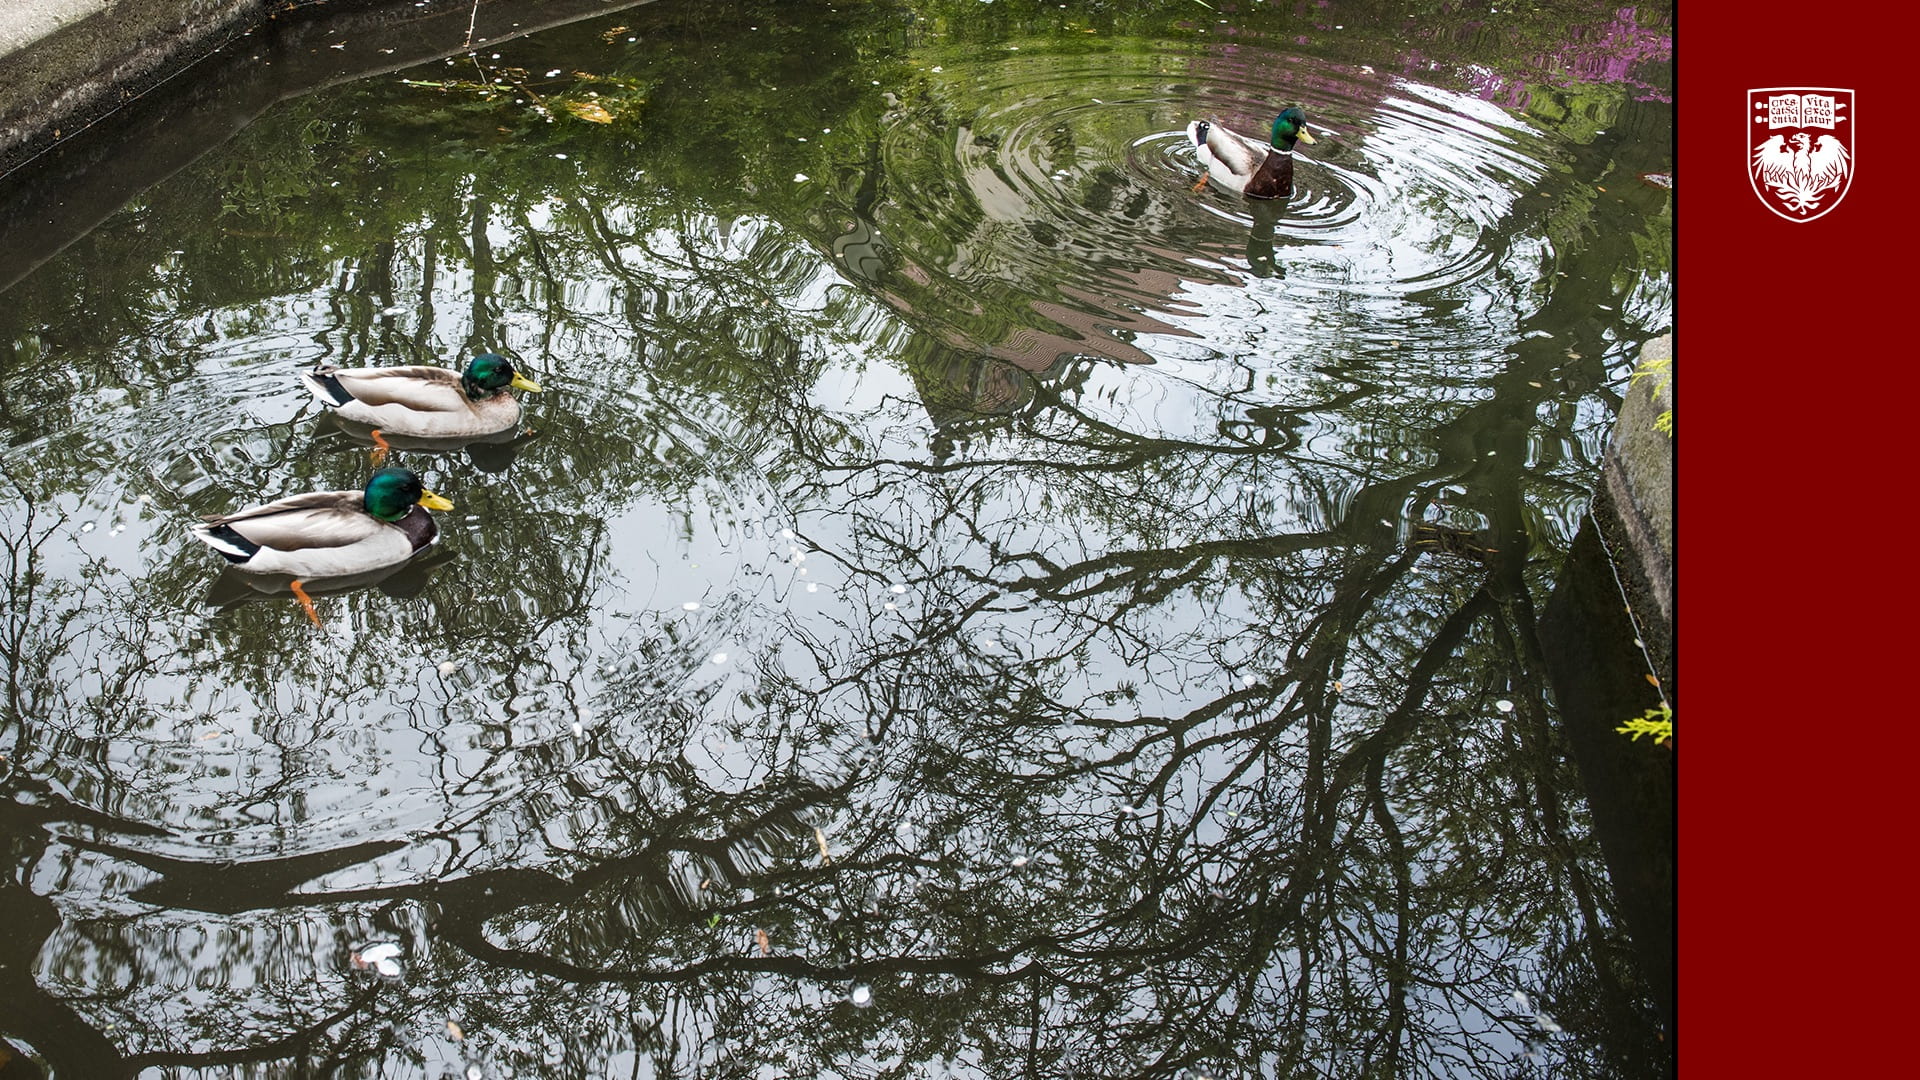 Three male ducks floating on the water with reflections of trees on the water